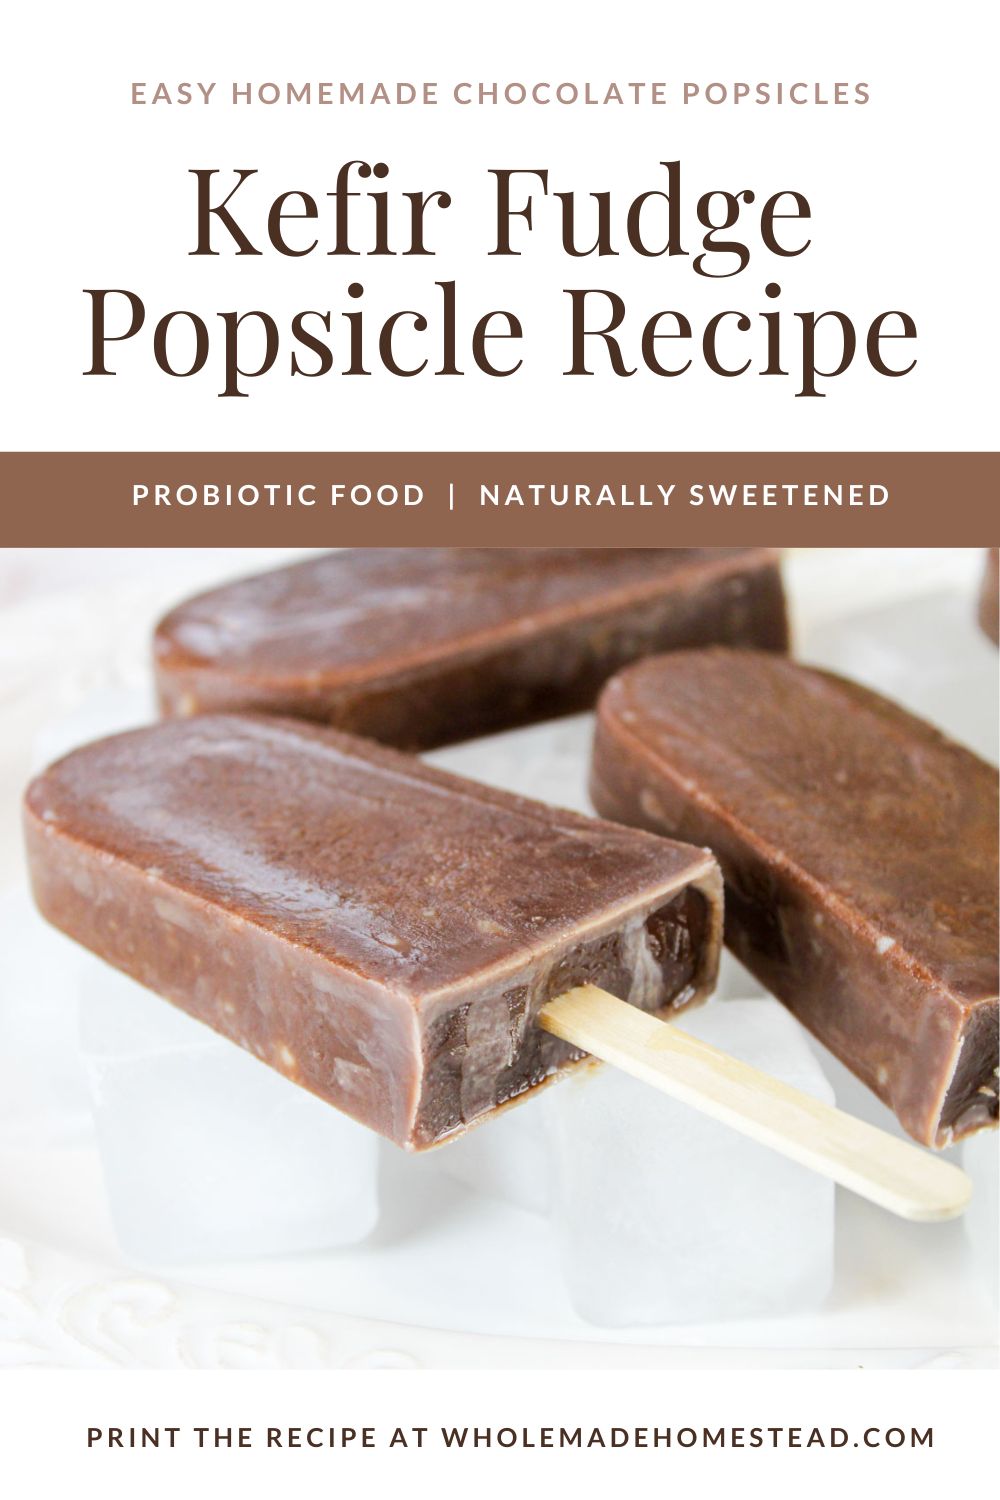 close up view of a chocolate popsicle